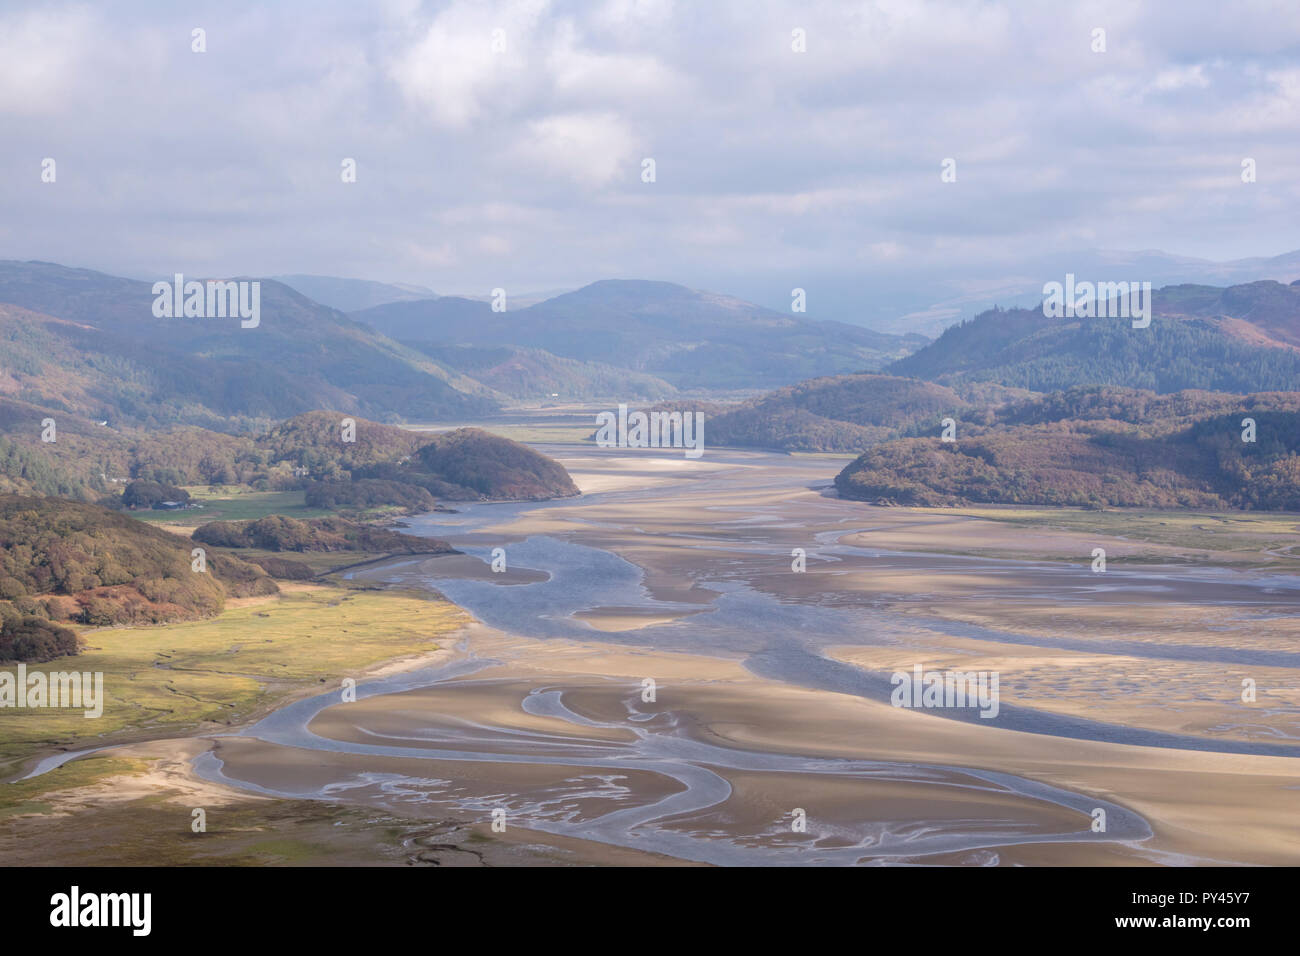 Looking down the Mawddach Estuary, Snowdonia National Park, north Wales, UK Stock Photo